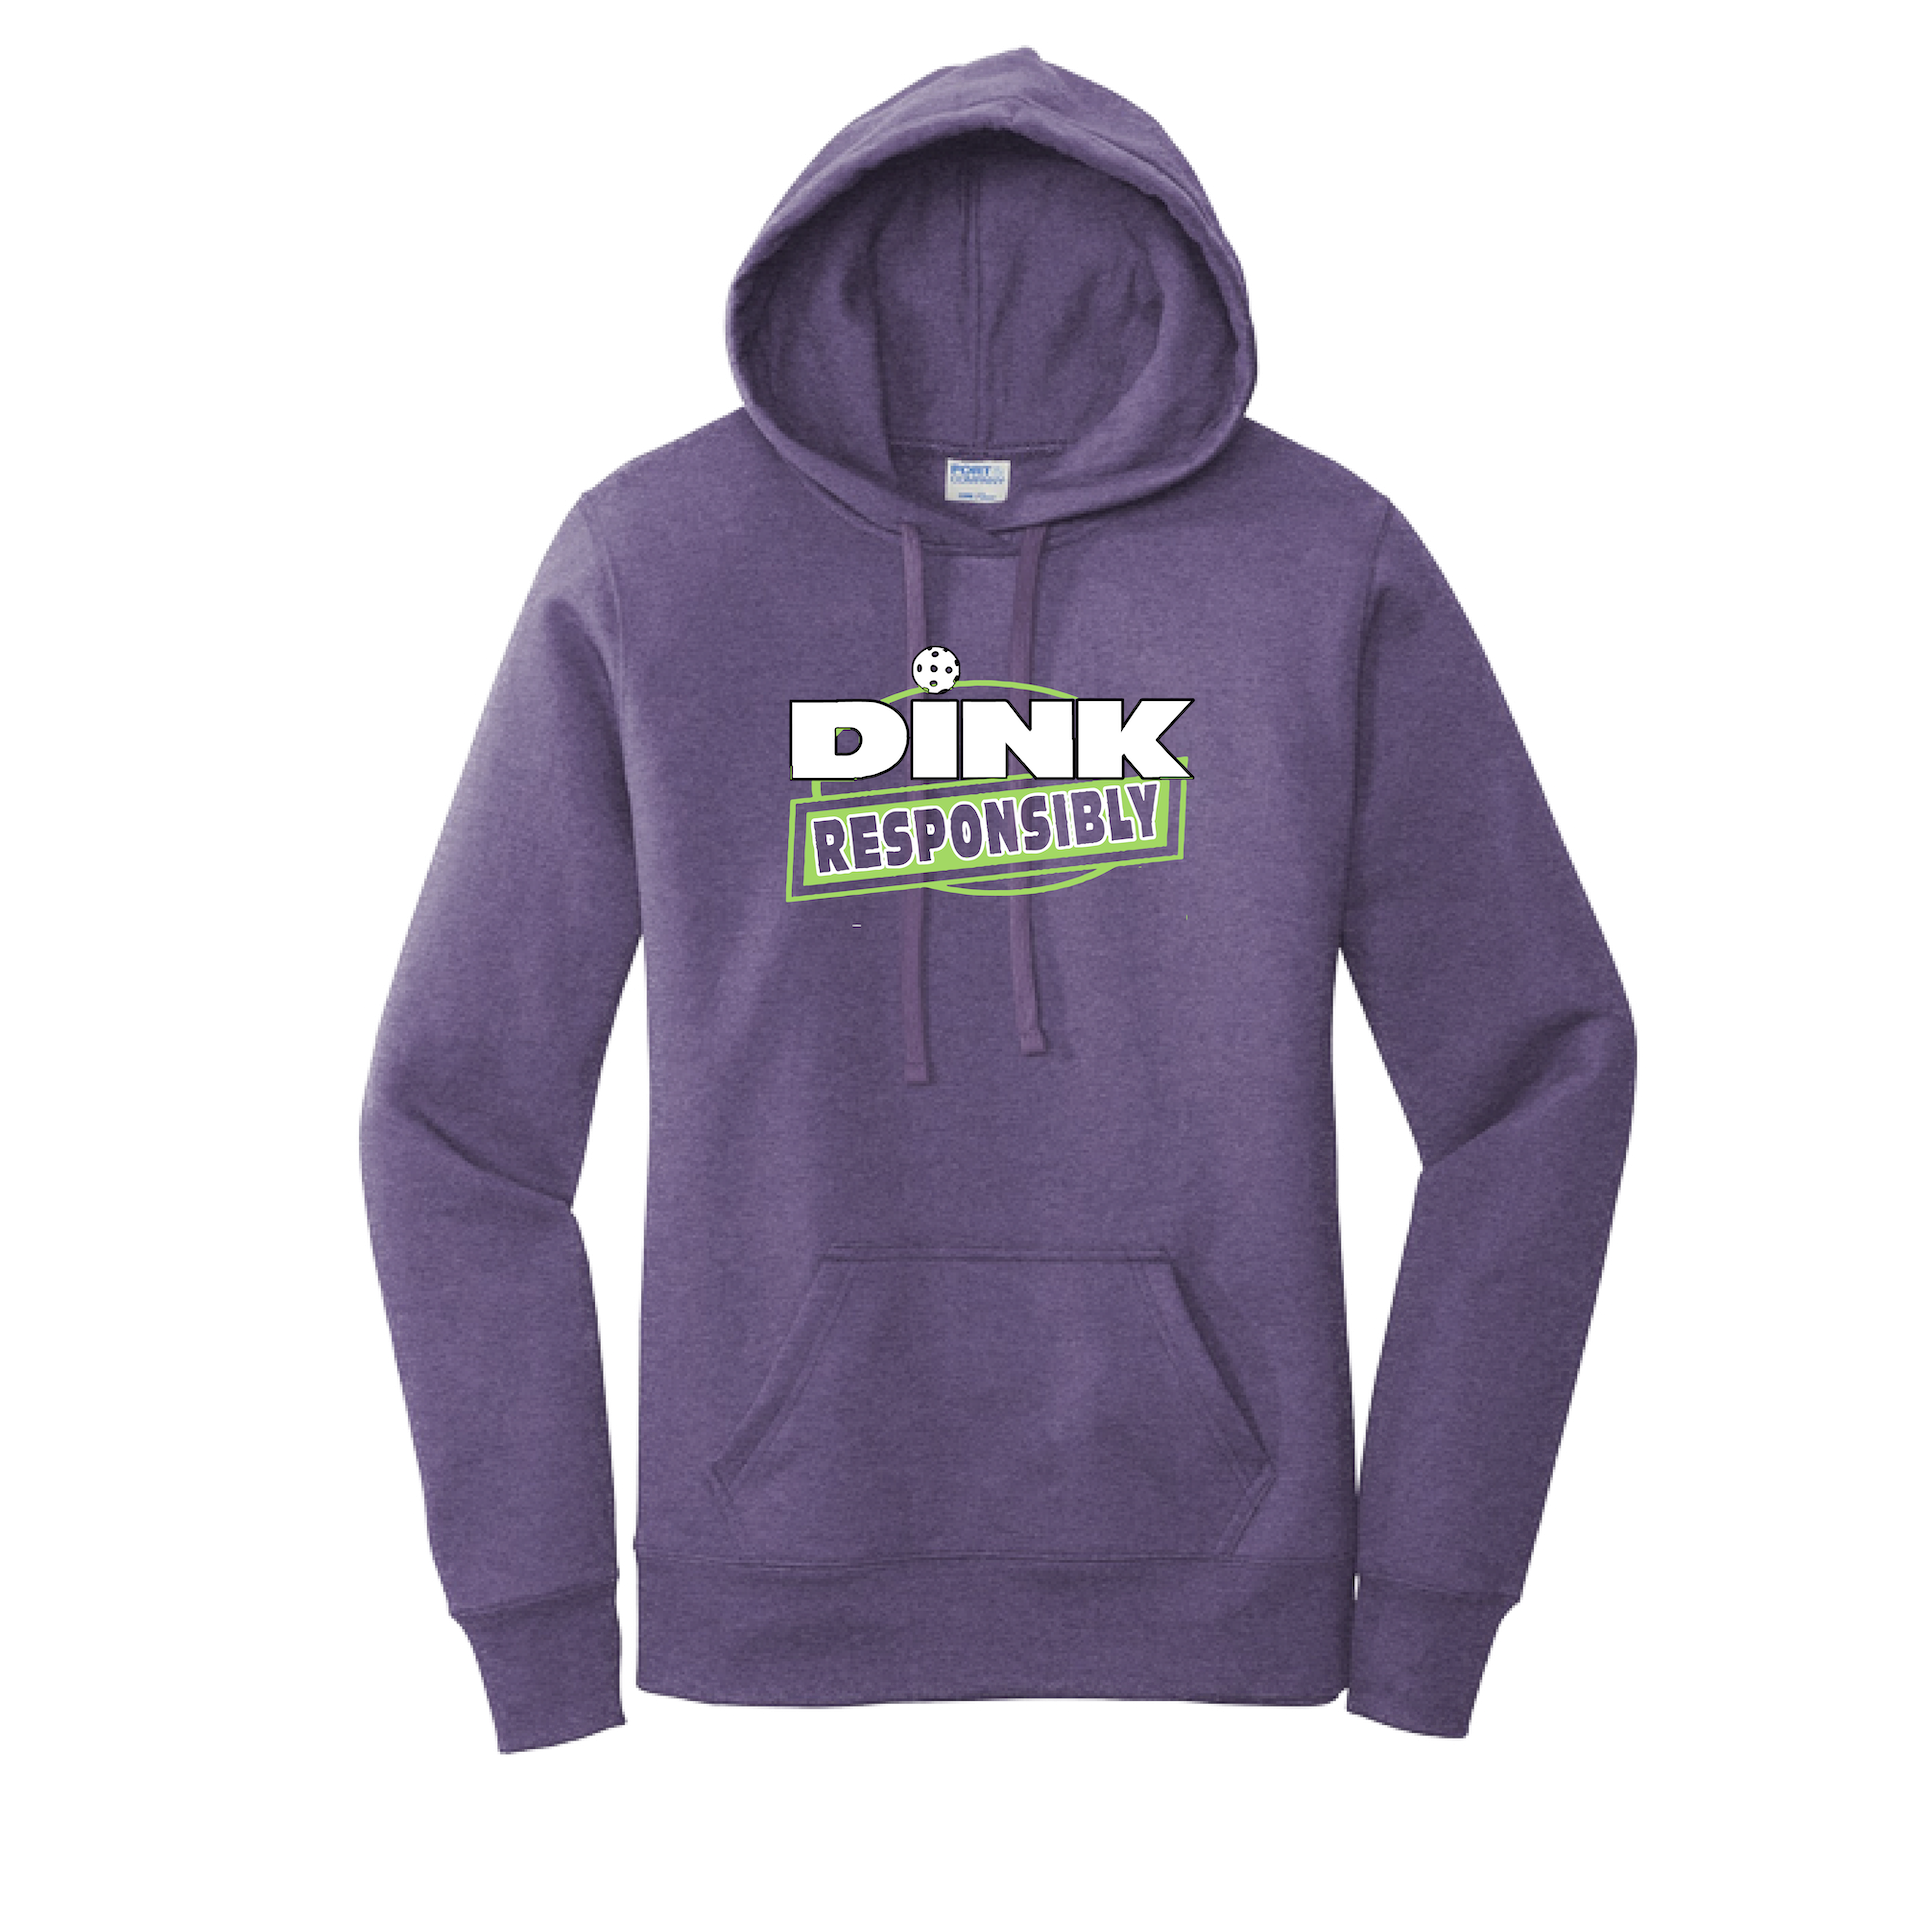 Pickleball Design: Dink Responsibly  Women's Hooded pullover Sweatshirt: 50/50 Cotton/Poly fleece.  Turn up the volume in this Women's Sweatshirts with its perfect mix of softness and attitude. Ultra soft lined inside with a lined hood also. This is fitted nicely for a women's figure. Front pouch pocket.